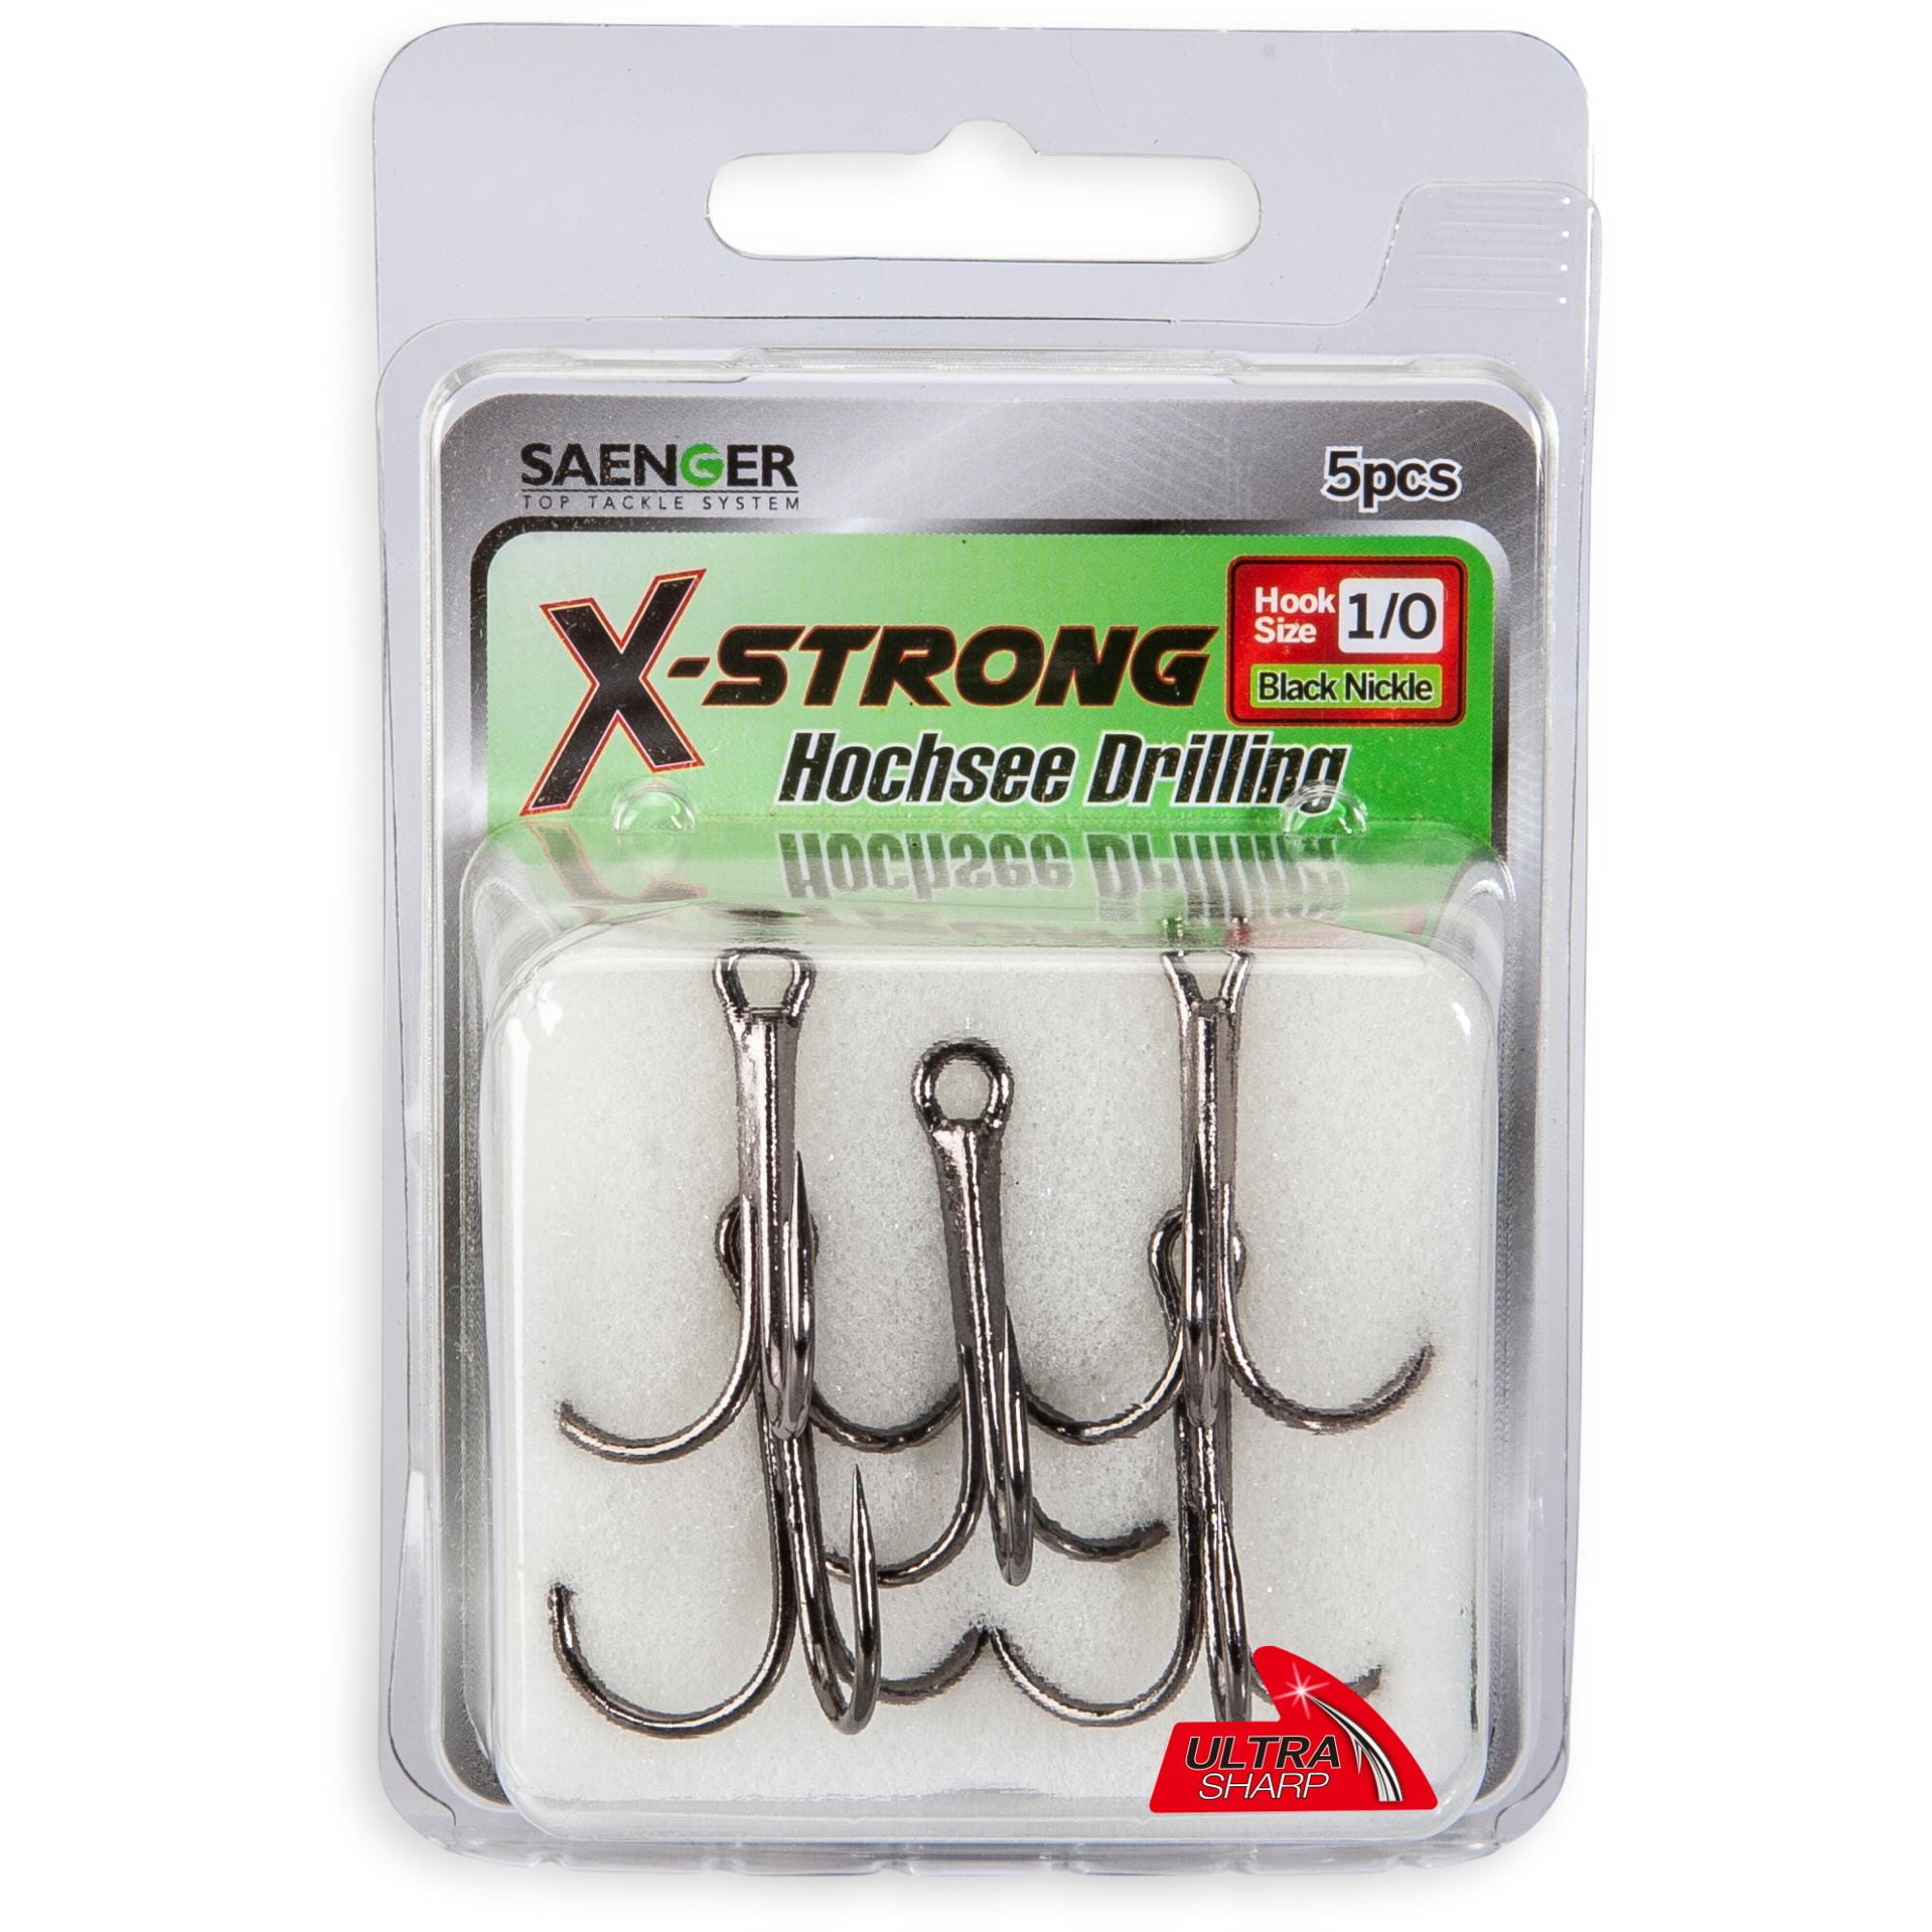 Saenger X-Strong Black Nickel treble hook size 1/0 5 pieces